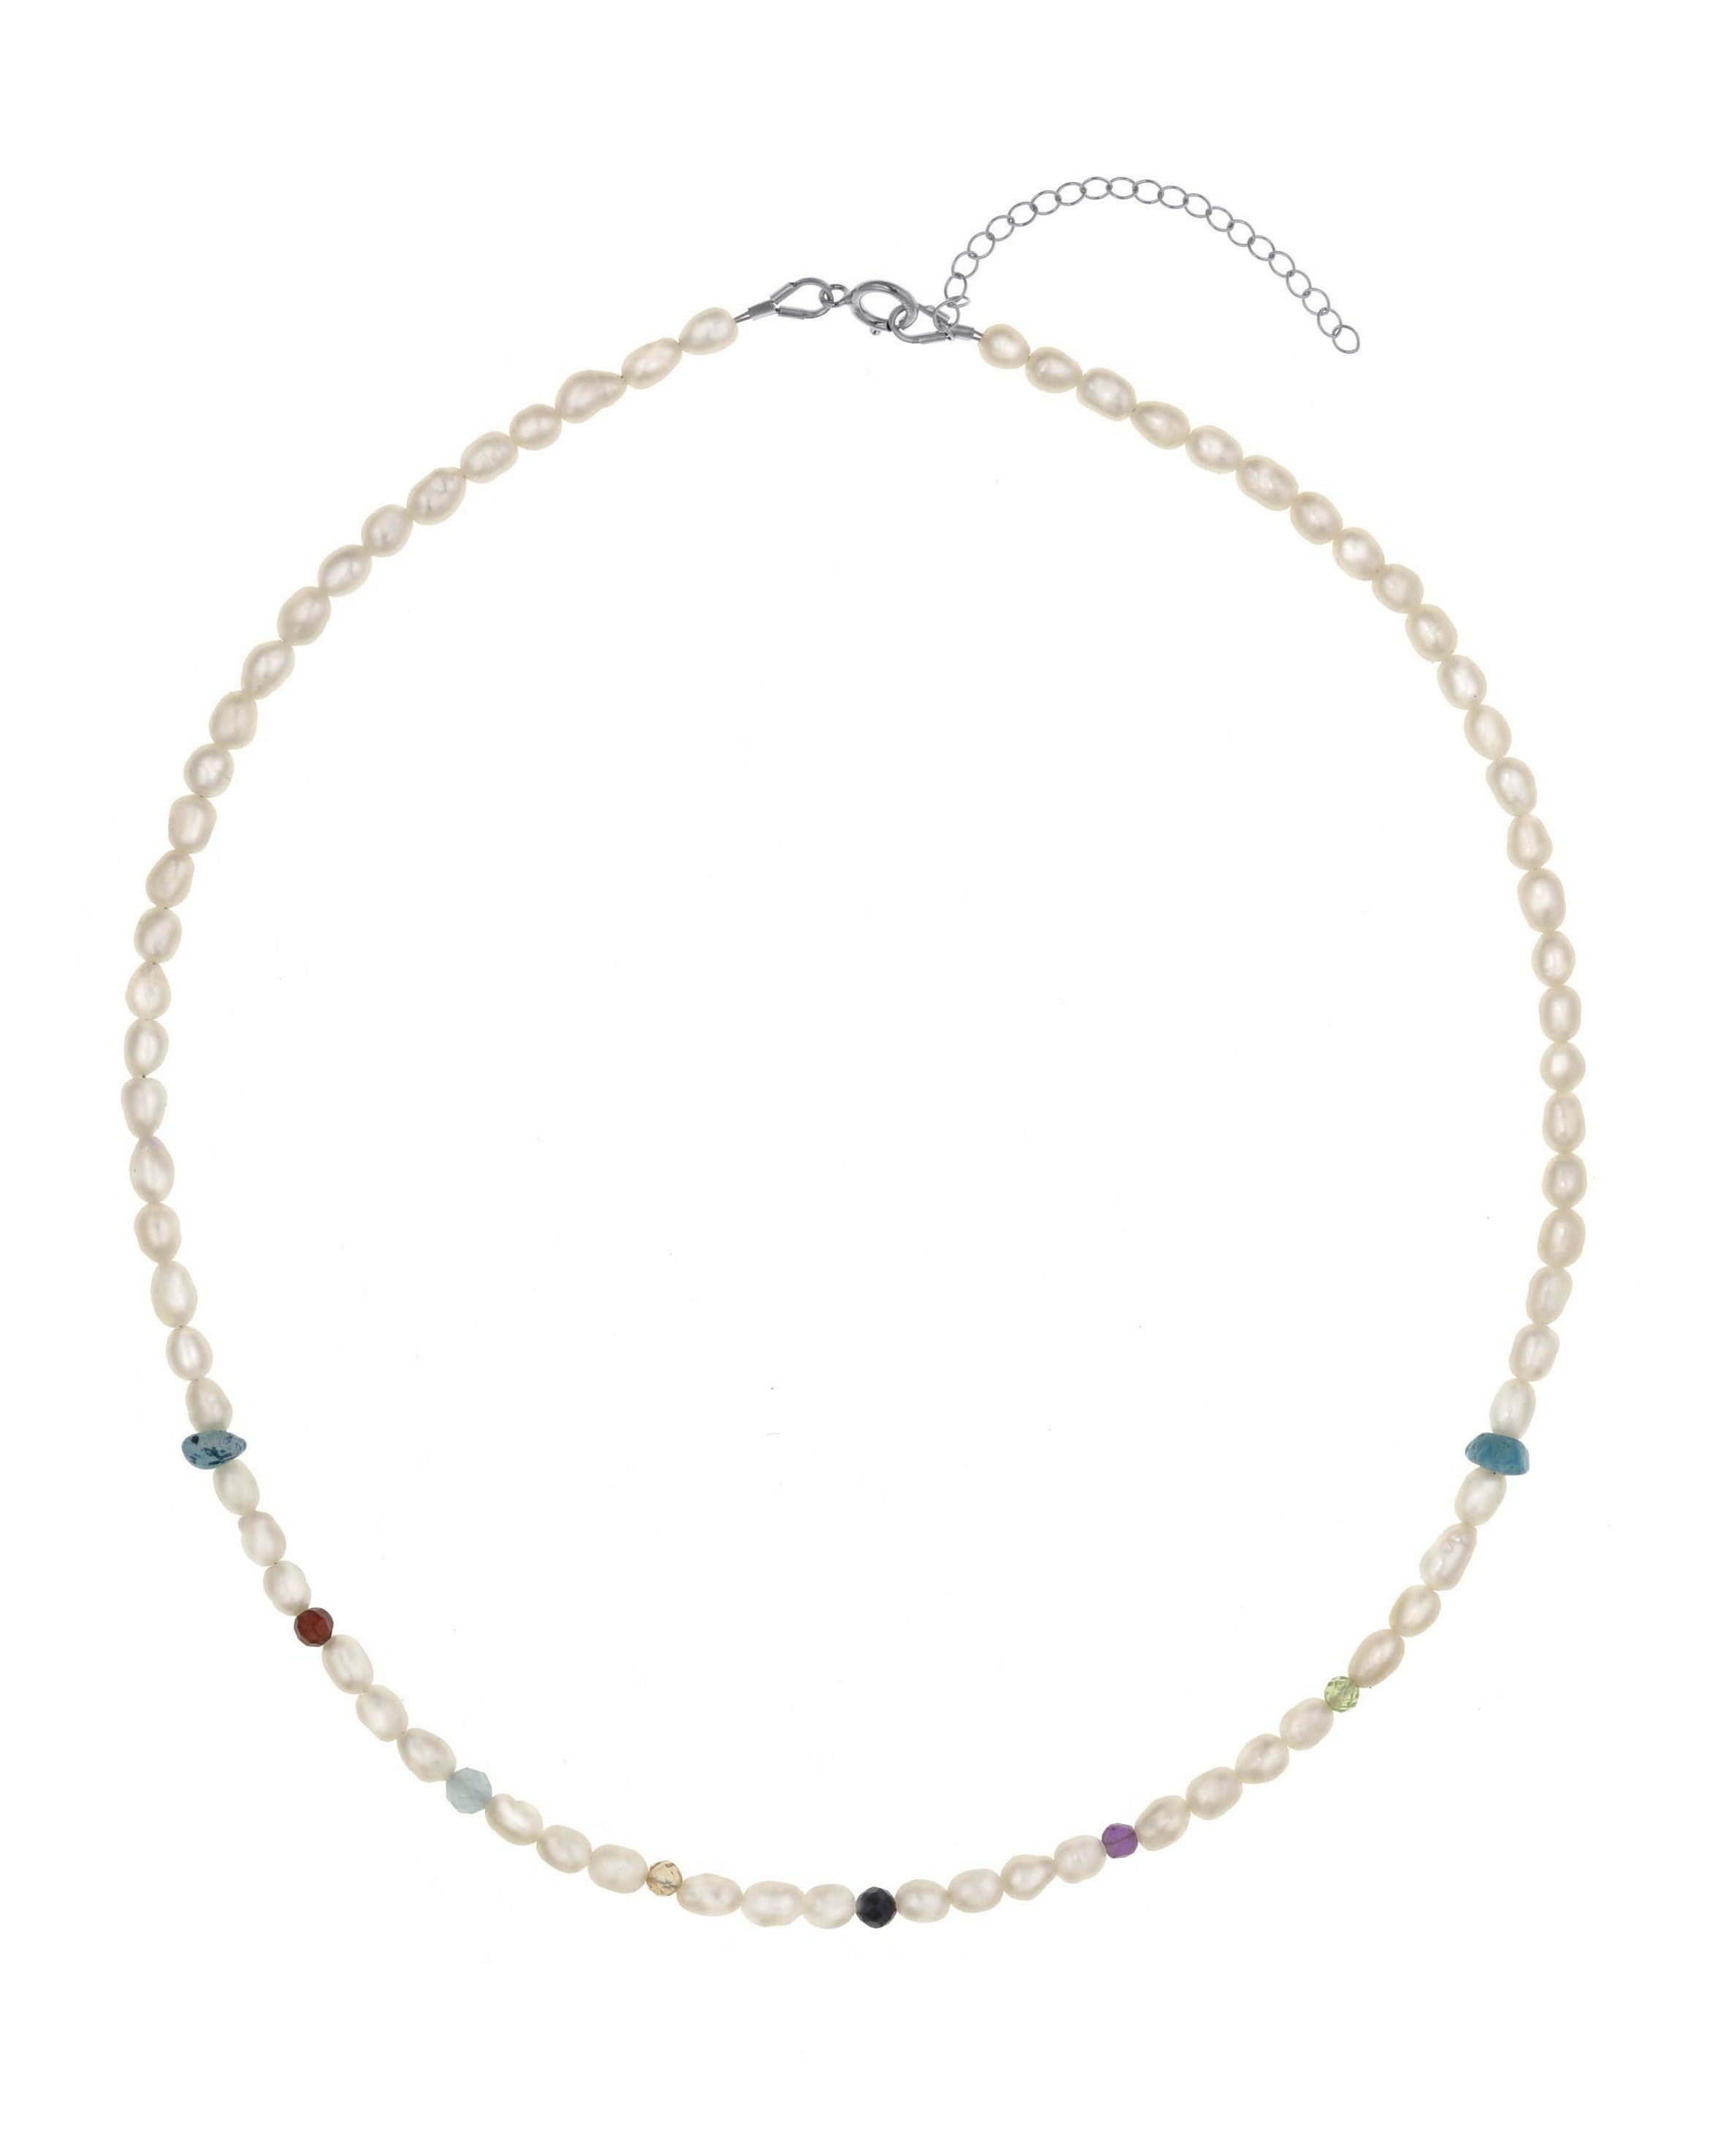 Zulema Necklace by KOZAKH. A 16 to 18 inch adjustable length, freshwater rice pearl strand necklace, clasp crafted in Sterling Silver, featuring Turquoise, Peridot, Sapphire, Topaz, Garnet, Aquamarine, and Amethyst gemstones.